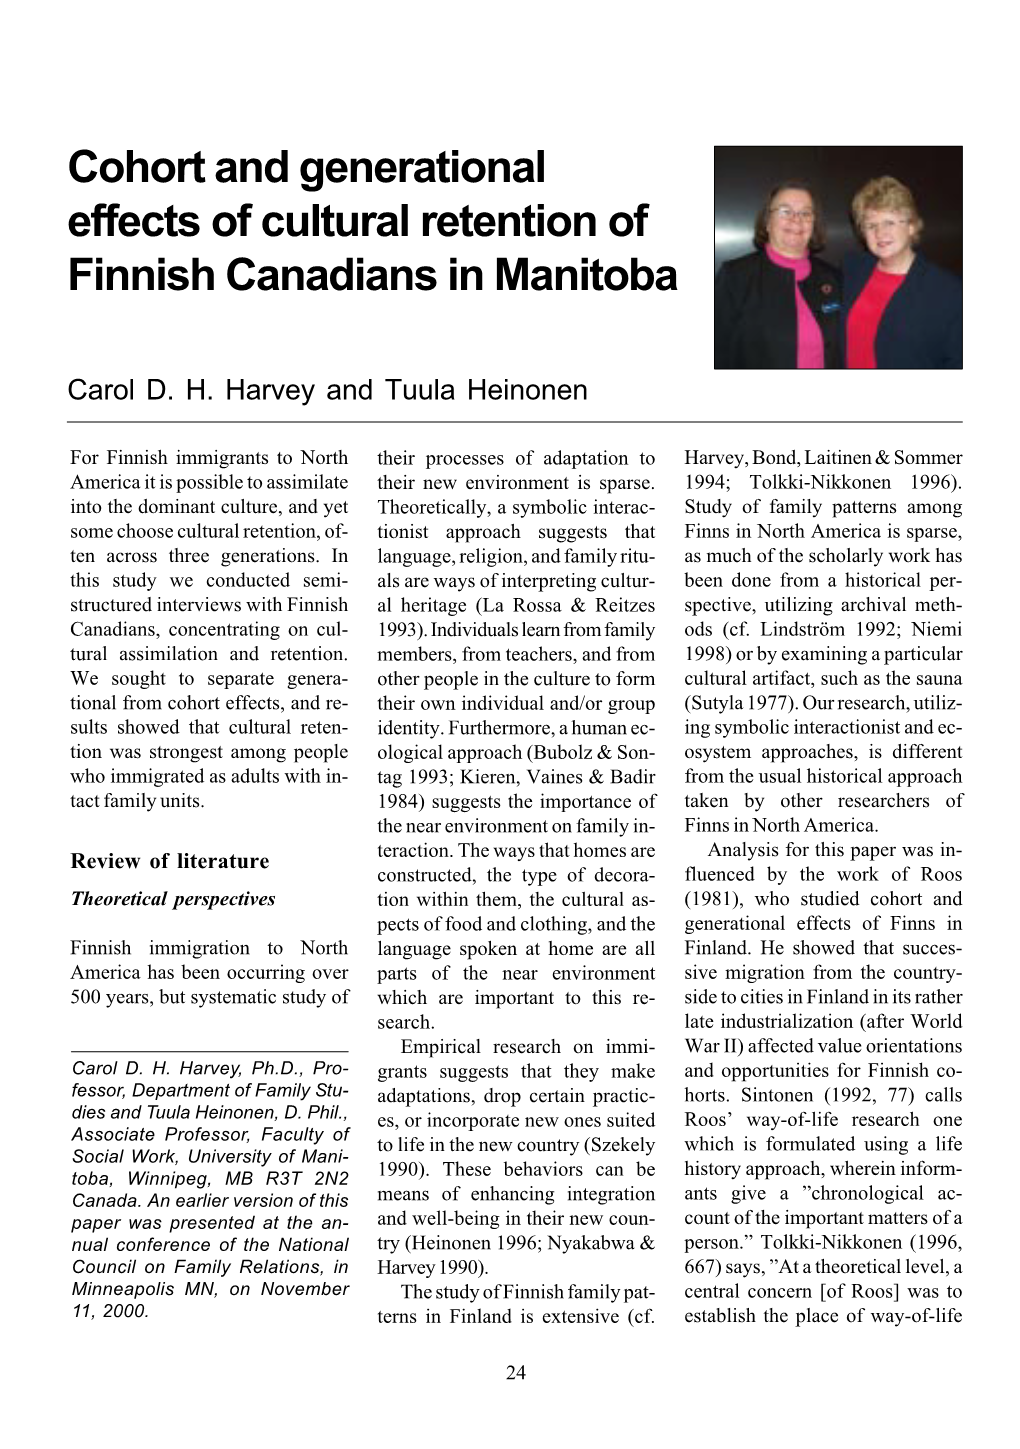 Cohort and Generational Effects of Cultural Retention of Finnish Canadians in Manitoba